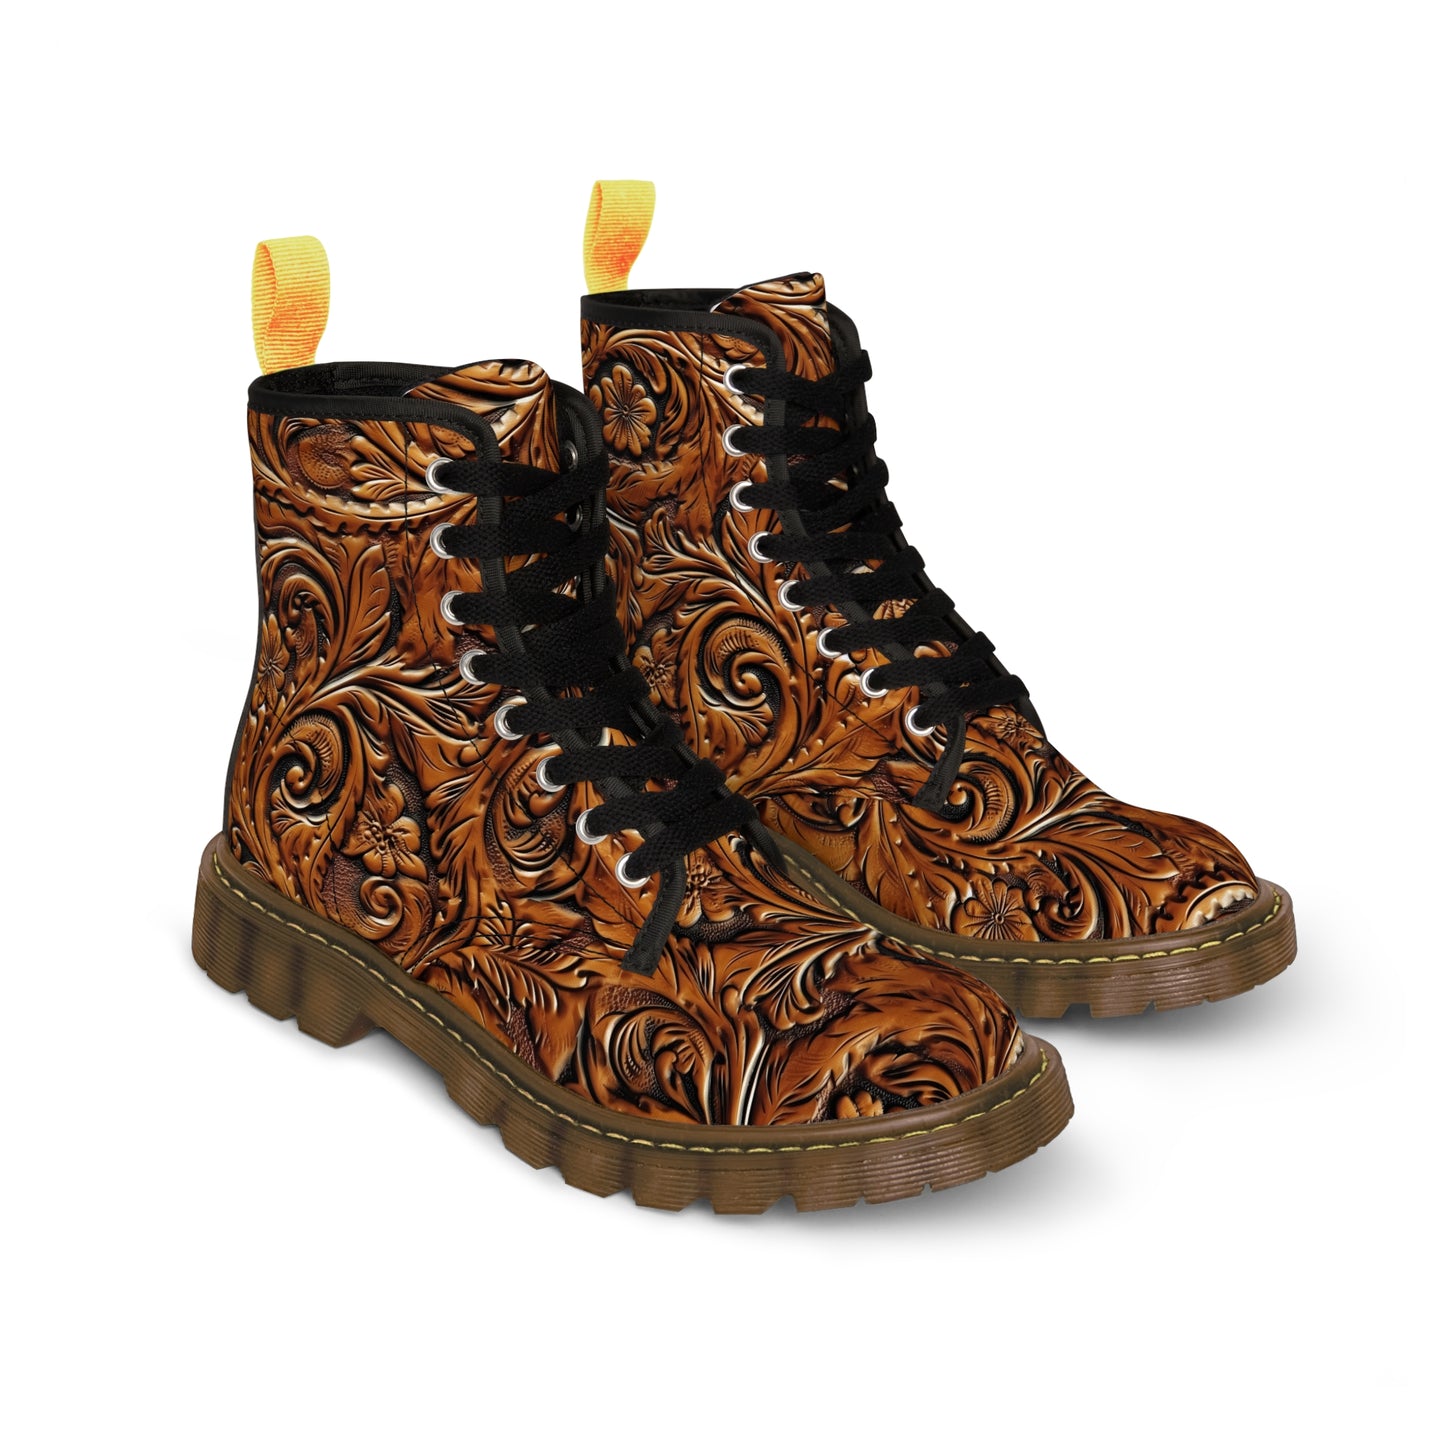 Tooled Leather Men's Canvas Boots (Brown) by Studio Ten Design